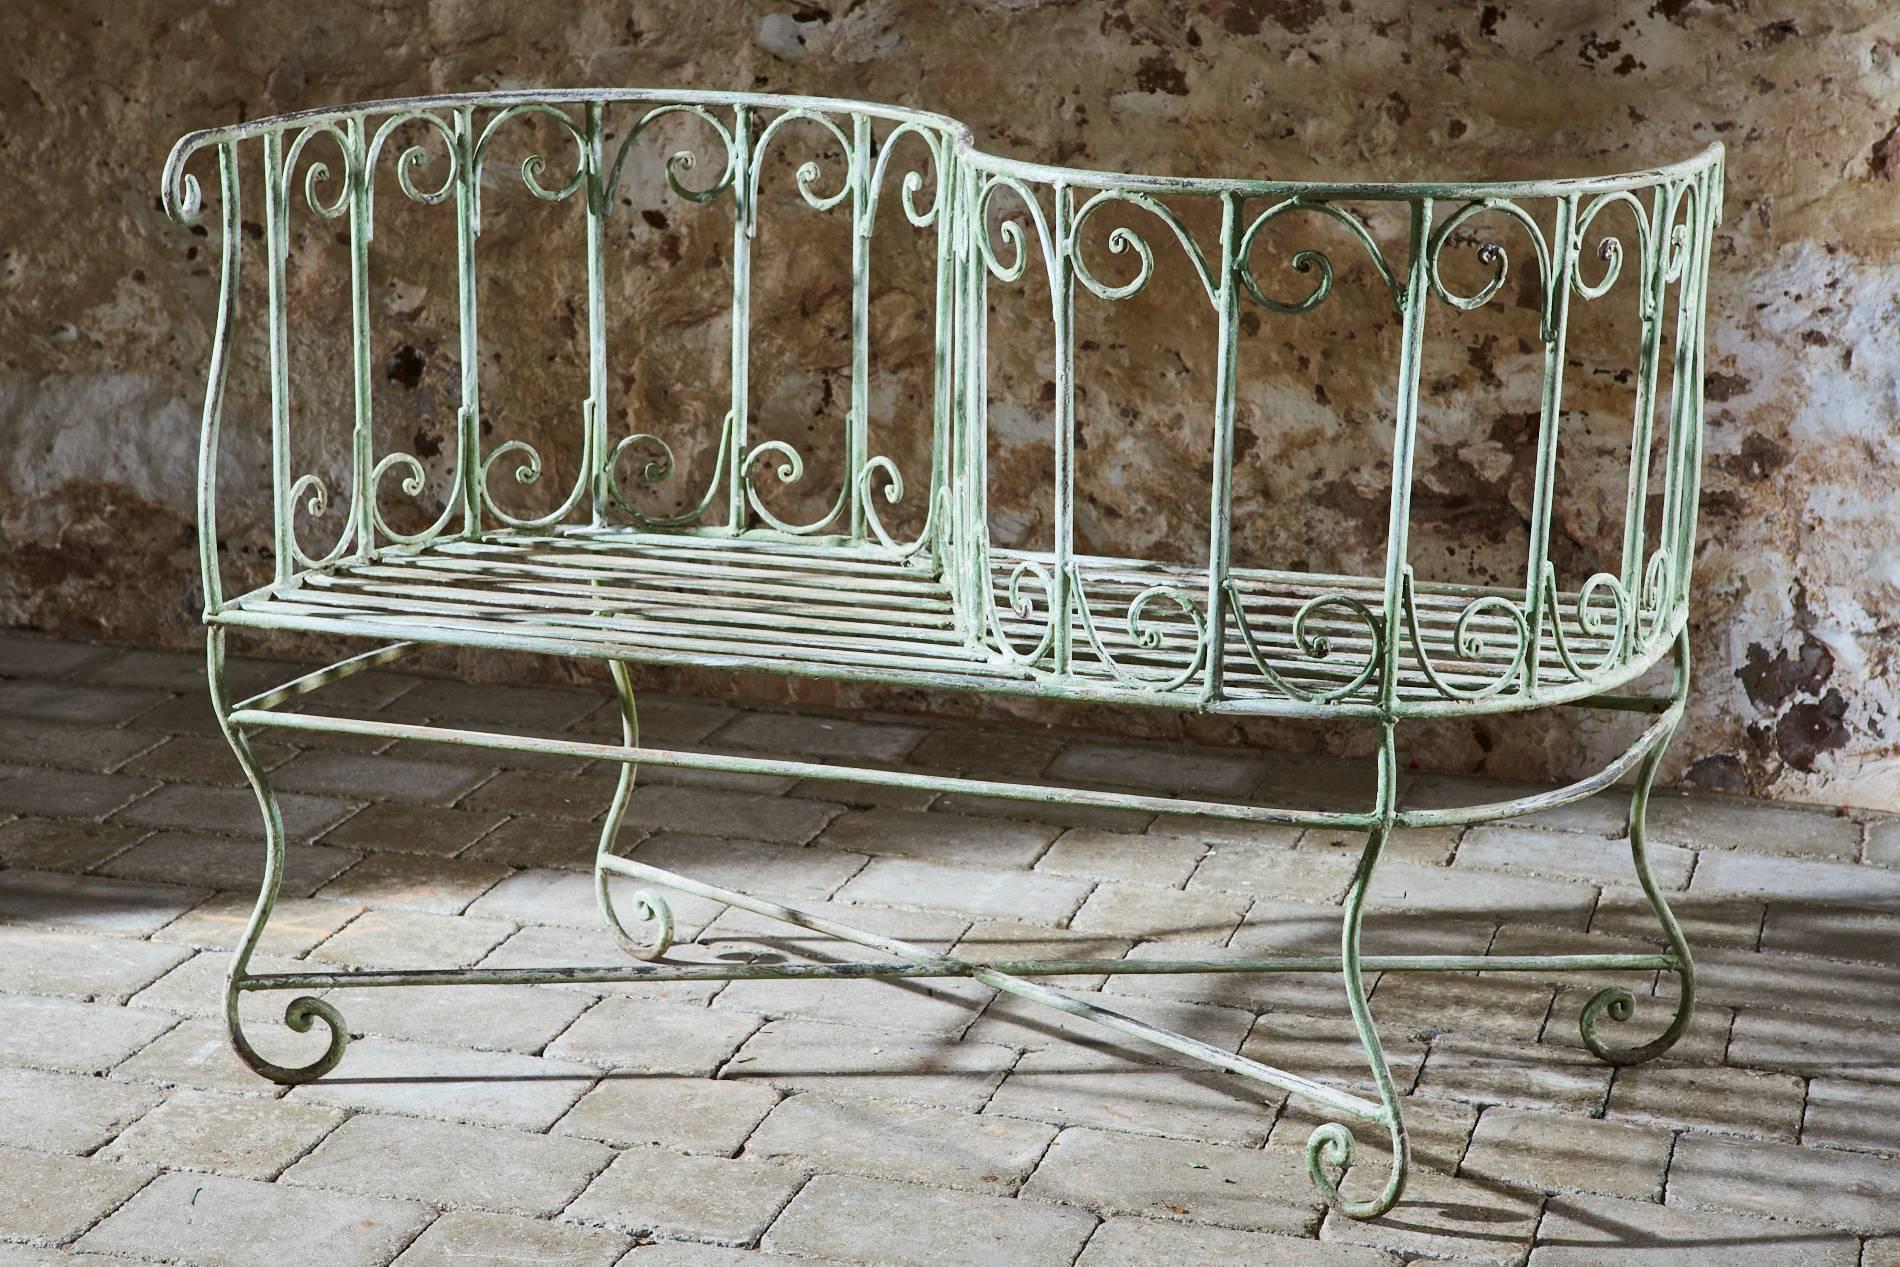 This beautiful wrought iron tête à tête/love seat originates from Scotland.

Hand-forged and decorated with a scroll design the pale green patina just oozes style.

It would add a touch of glamour to any garden or terrace and would make a